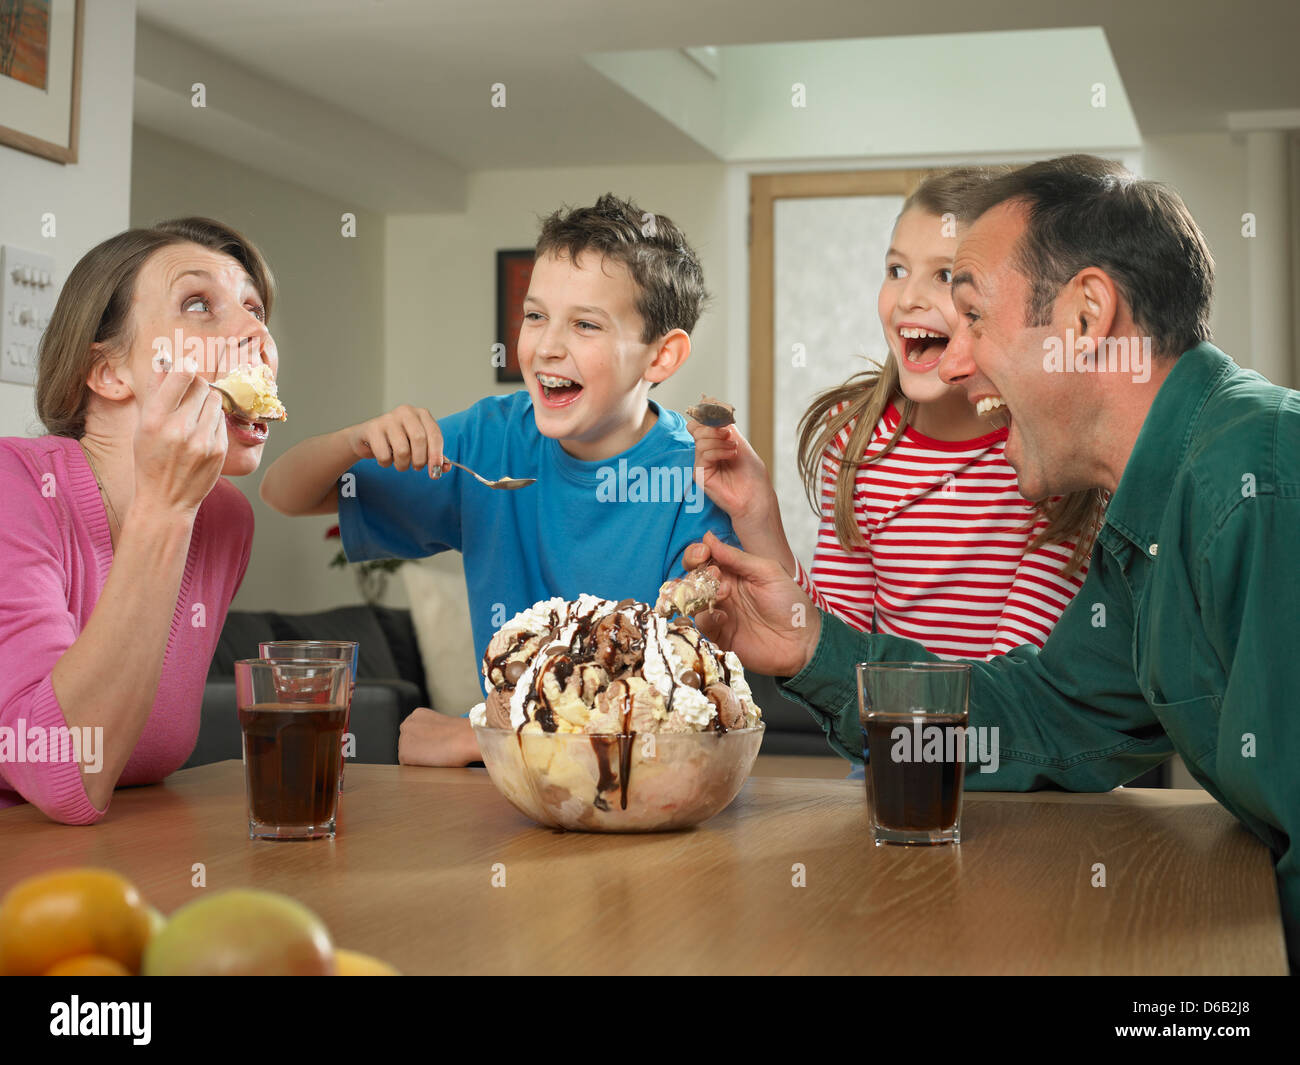 Family eating ice cream together Stock Photo